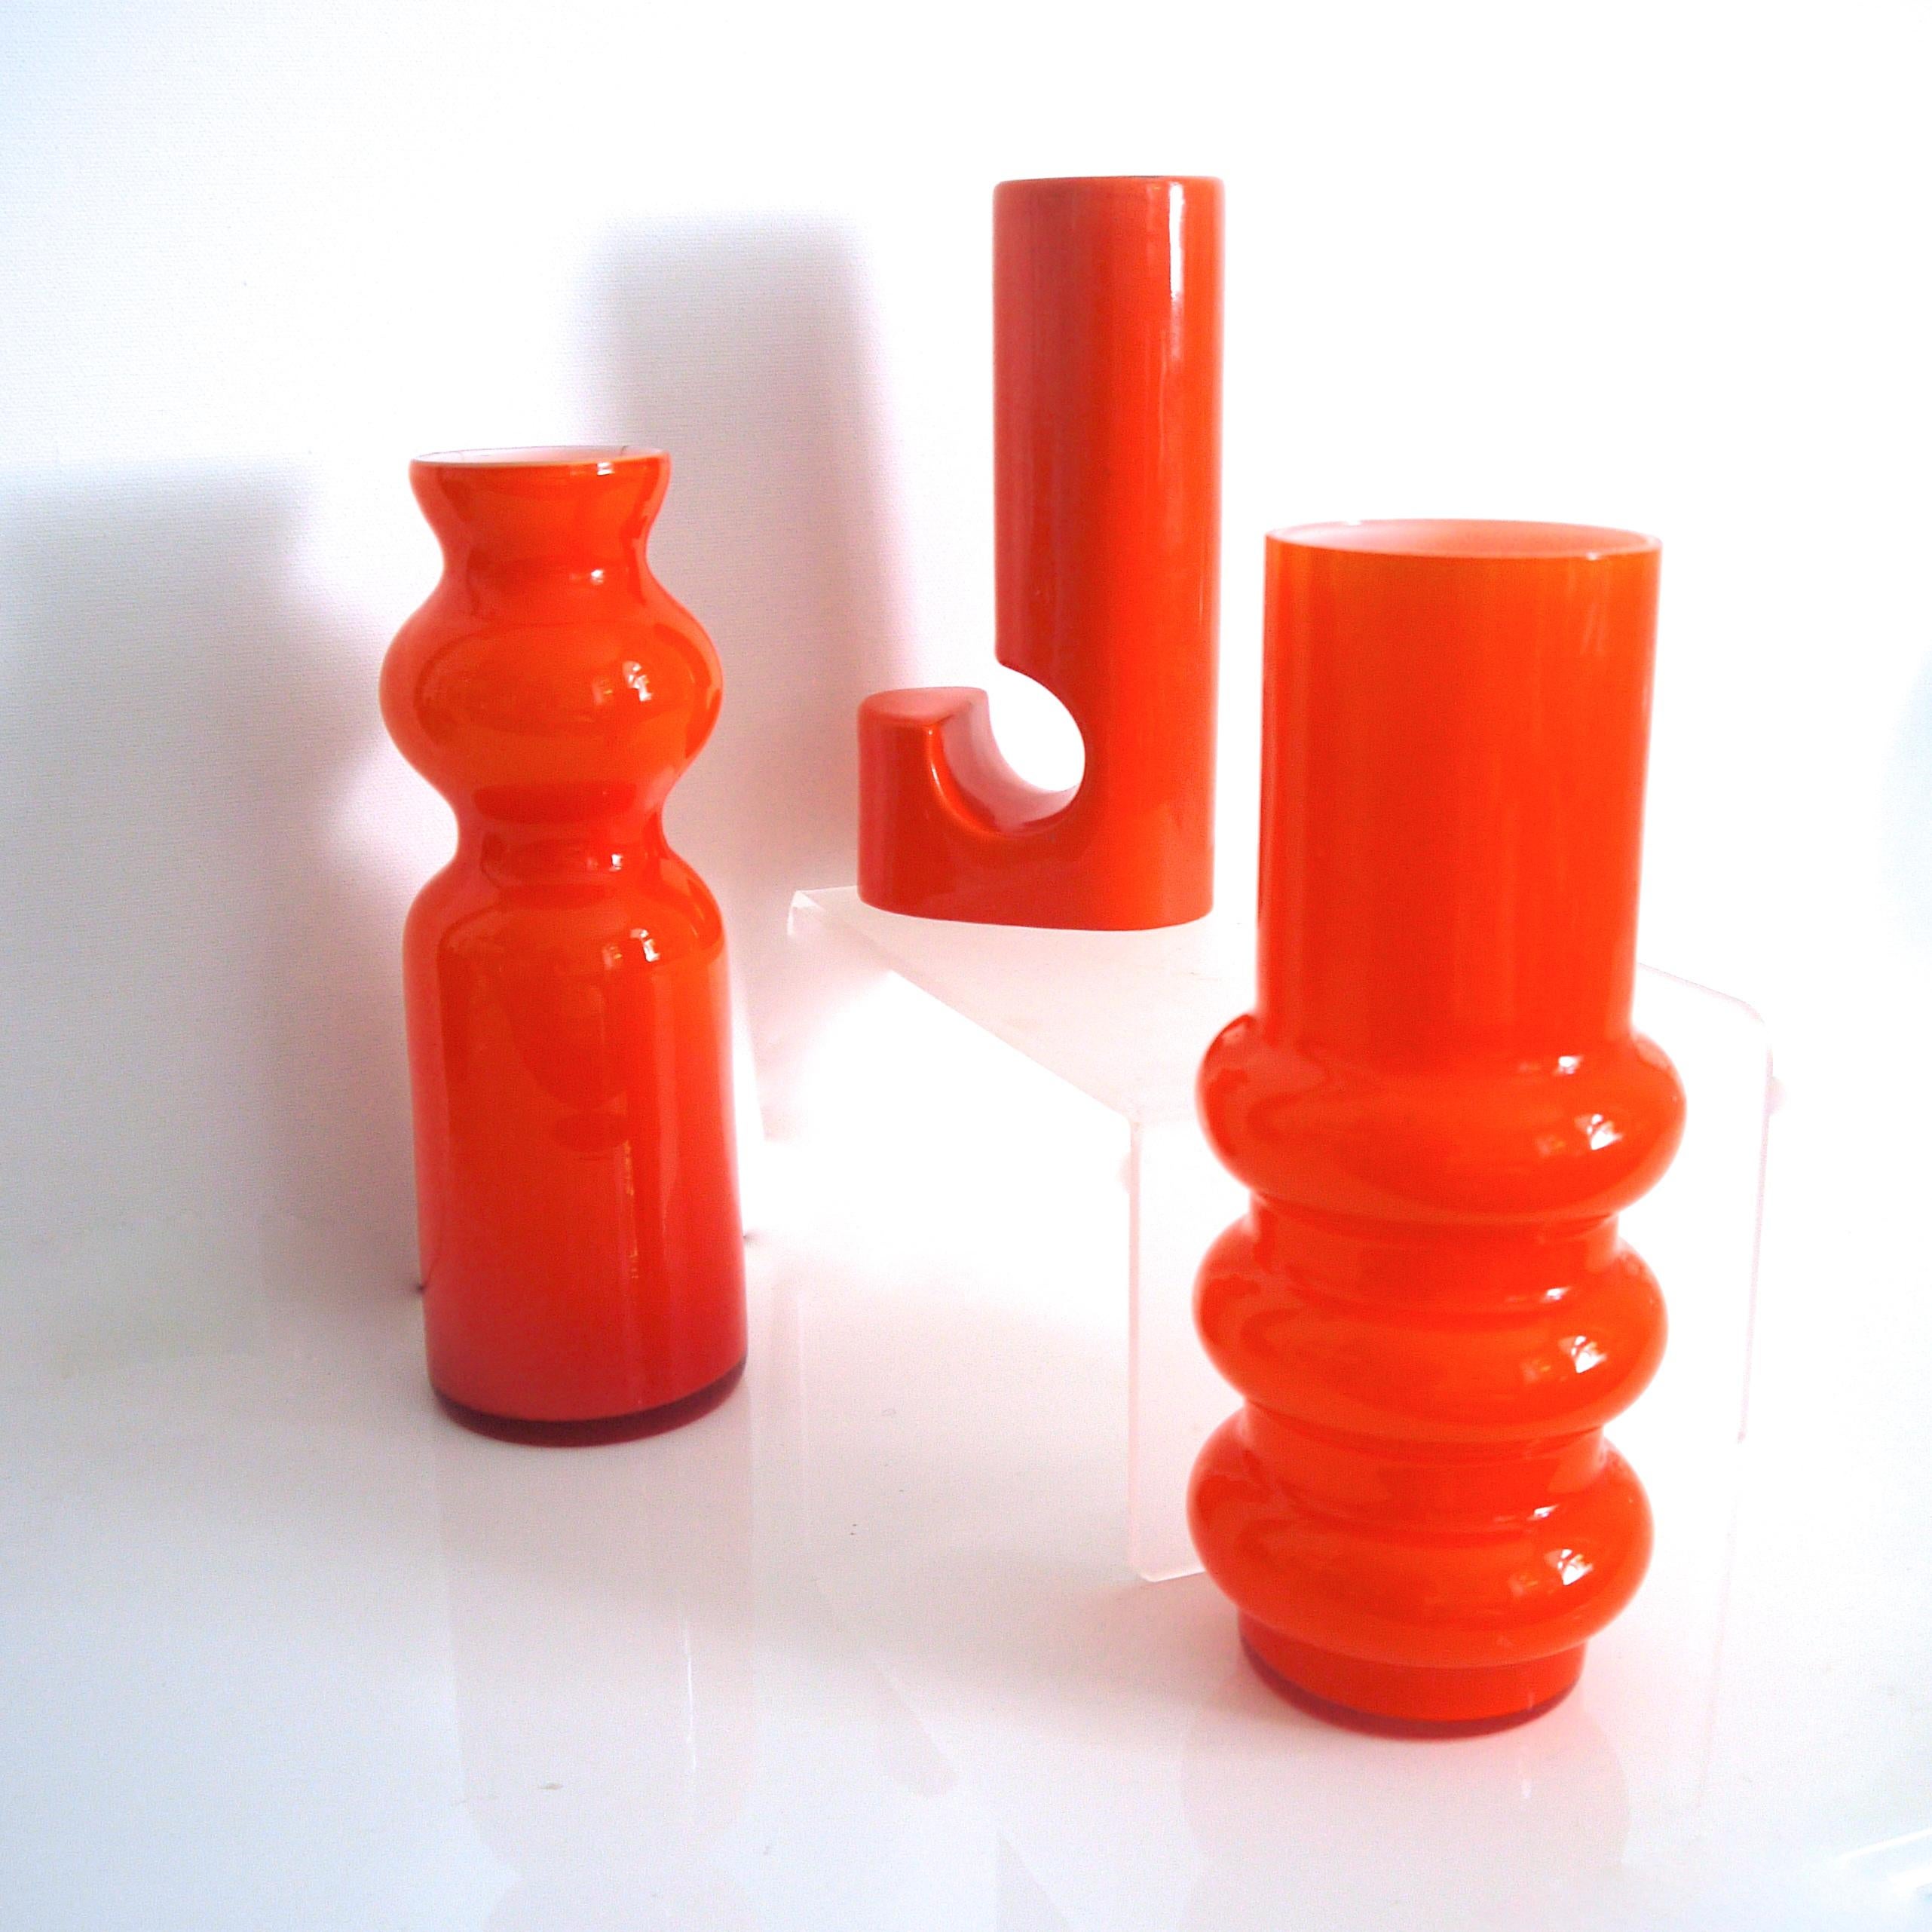 Scandinavian Modern Collection of Orange Hooped Glass Vases by Ryd, Mid-1970s For Sale 1